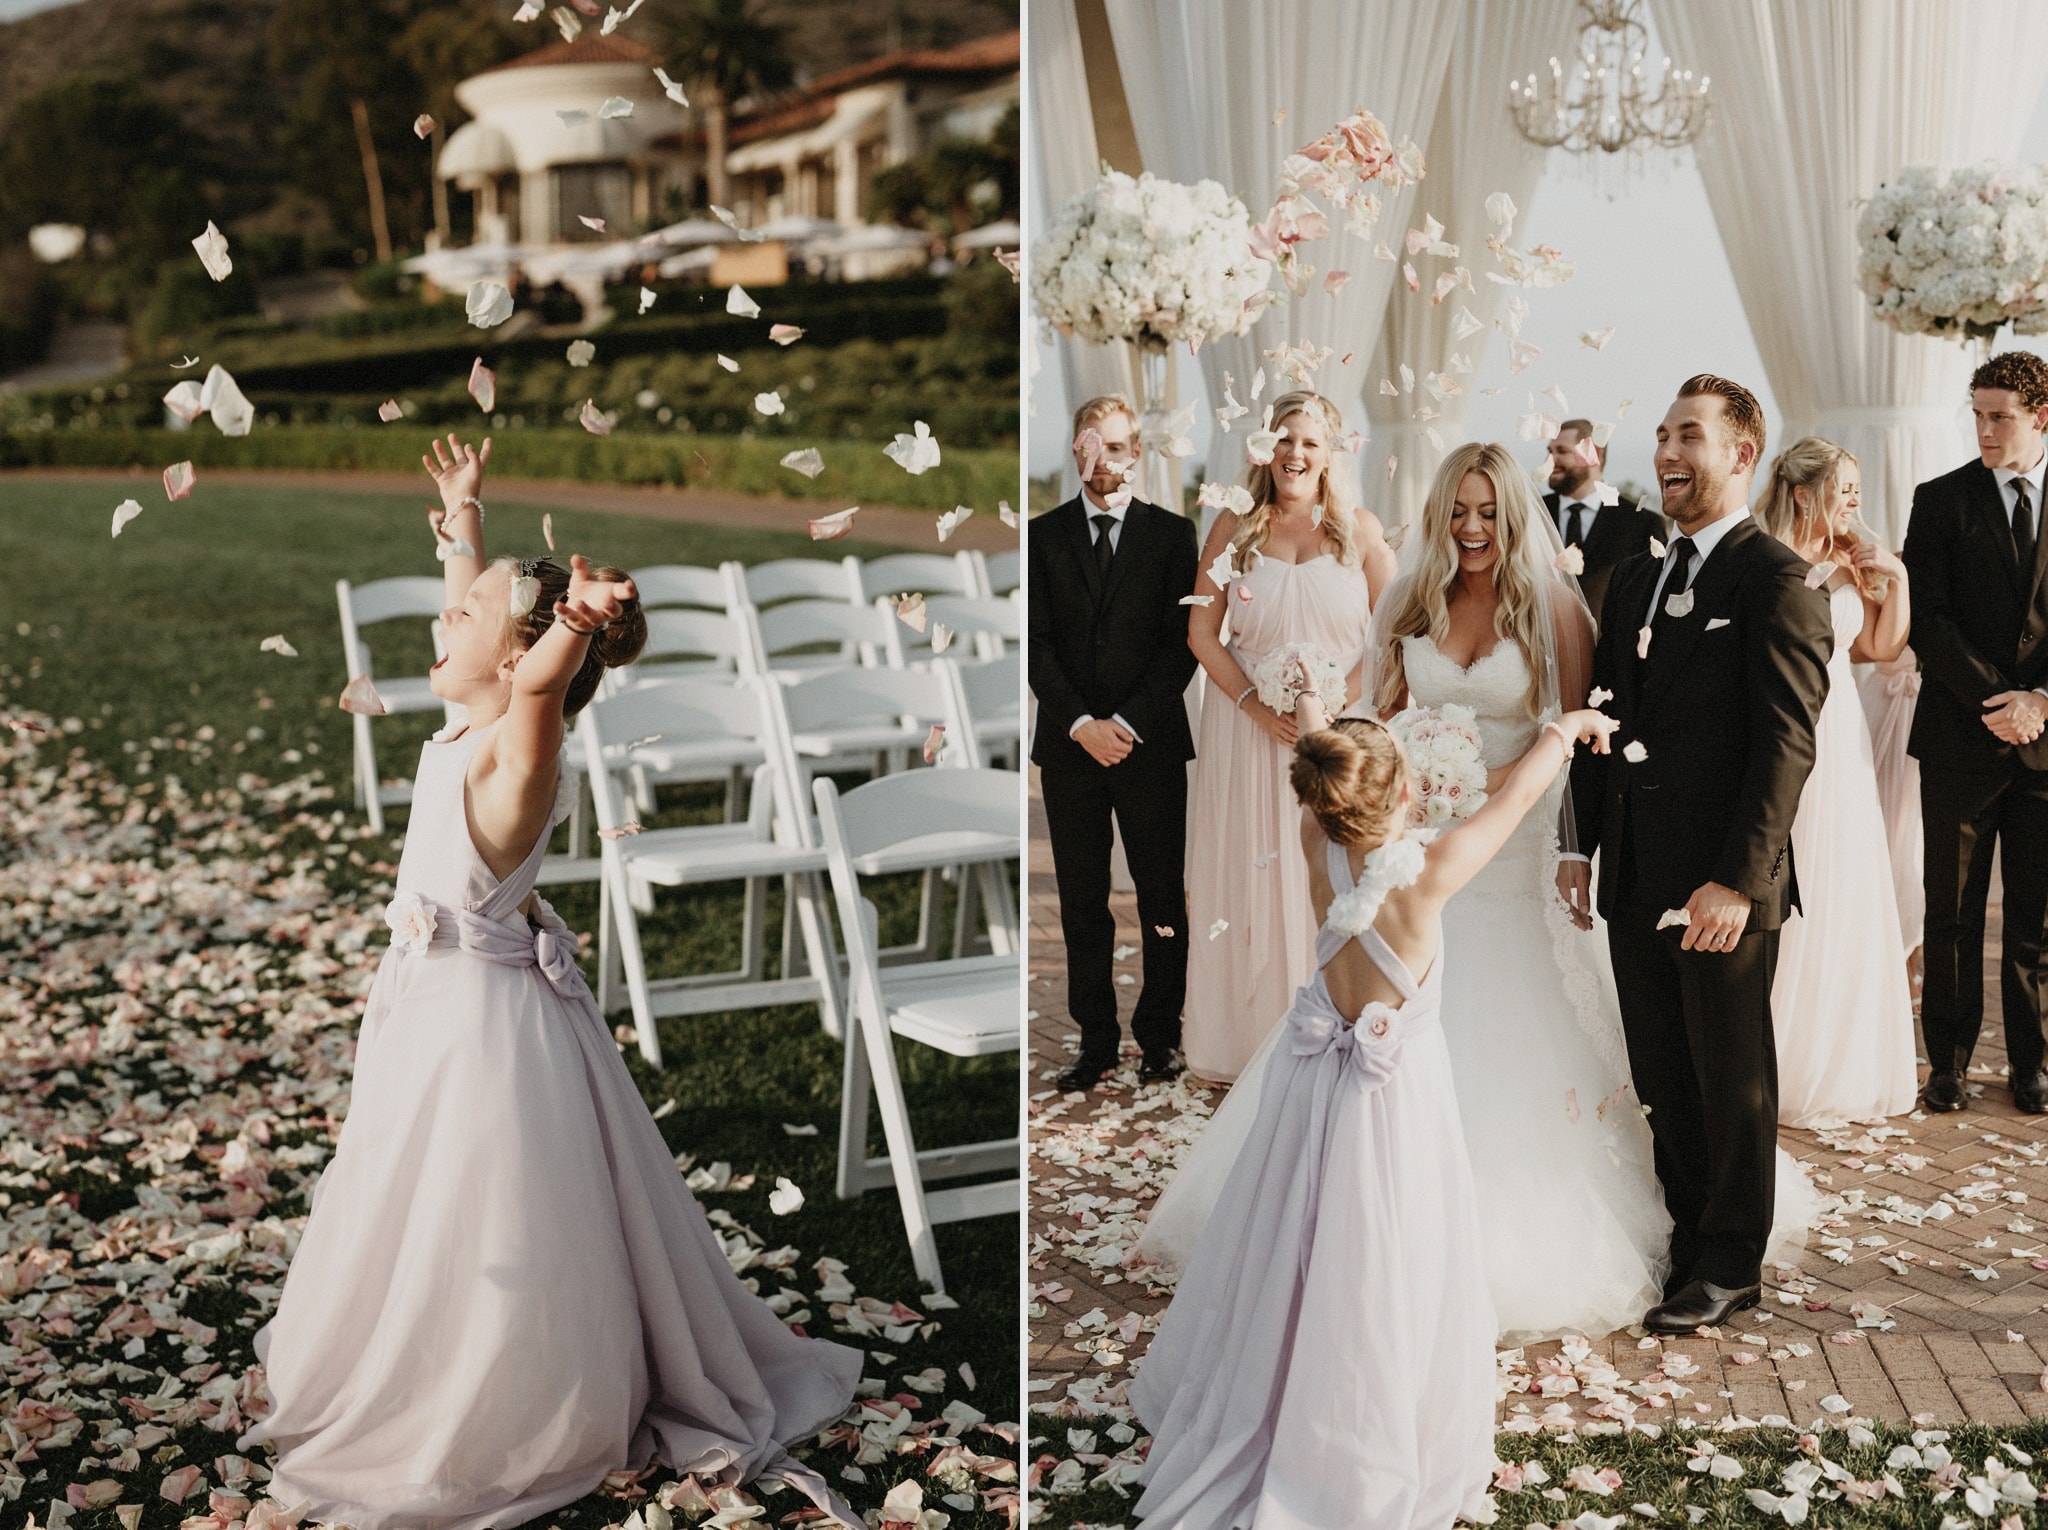 A flower girl throws petals in the air during an outdoor wedding in Newport Beach.